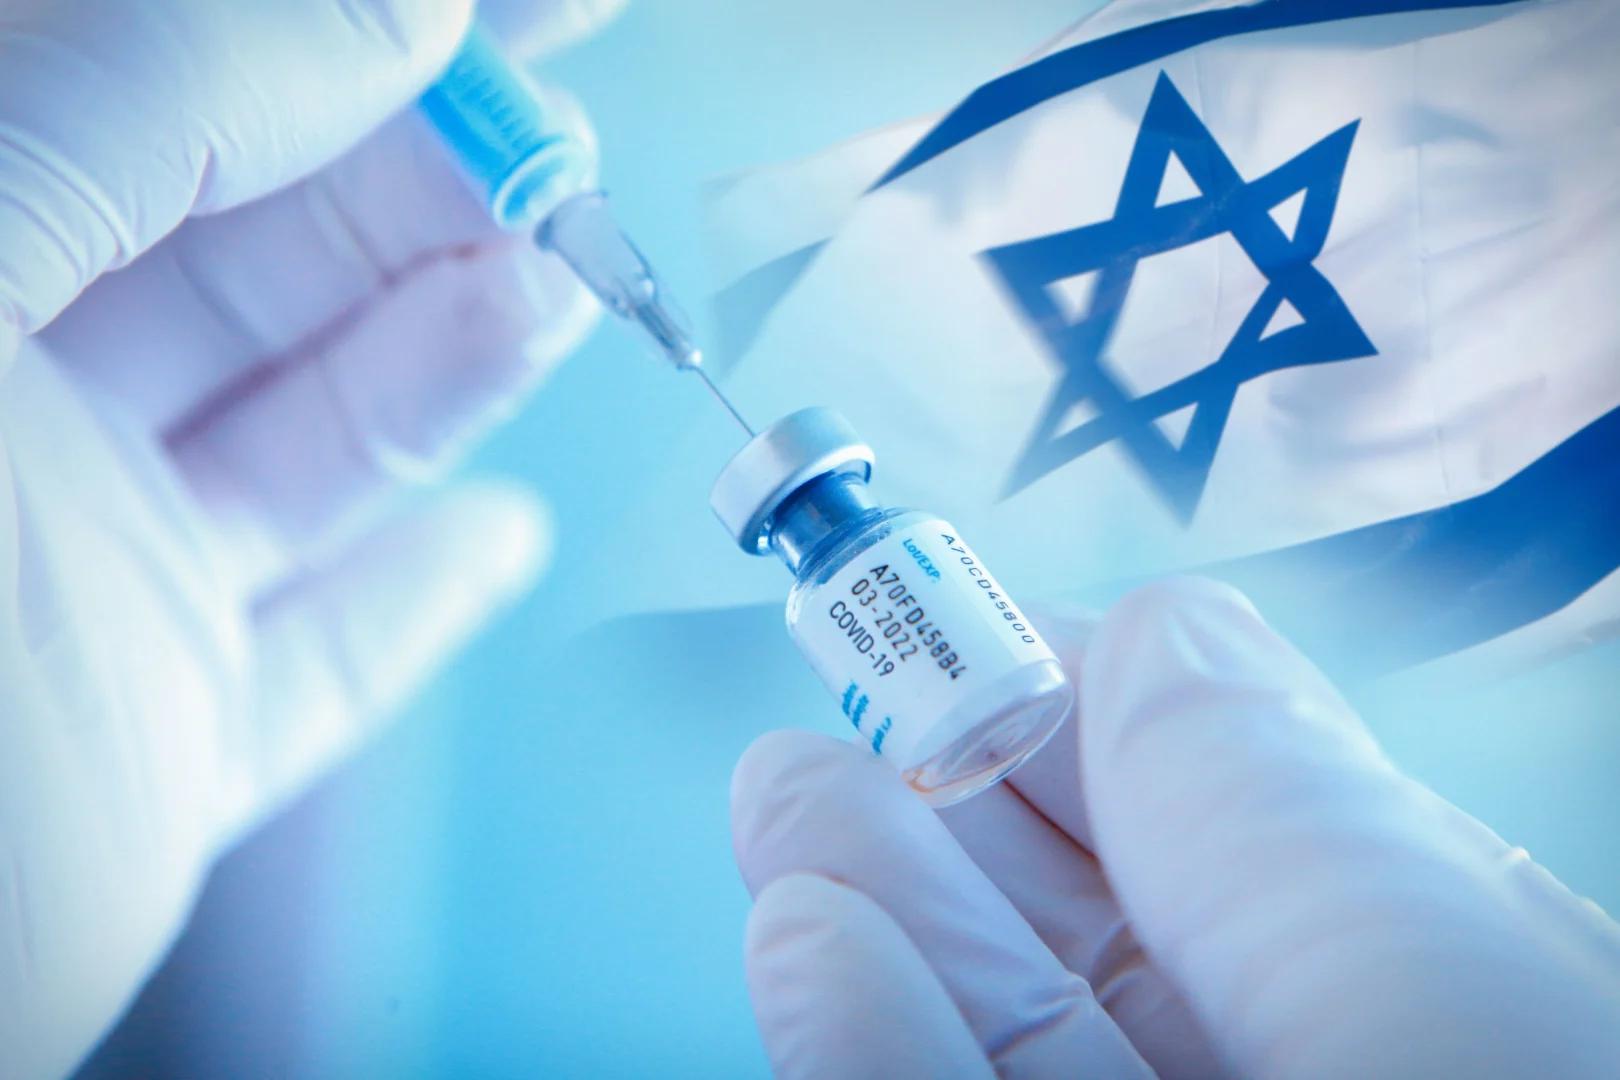 Did Israeli Health Ministry lie about and manipulate expert report on adverse events?